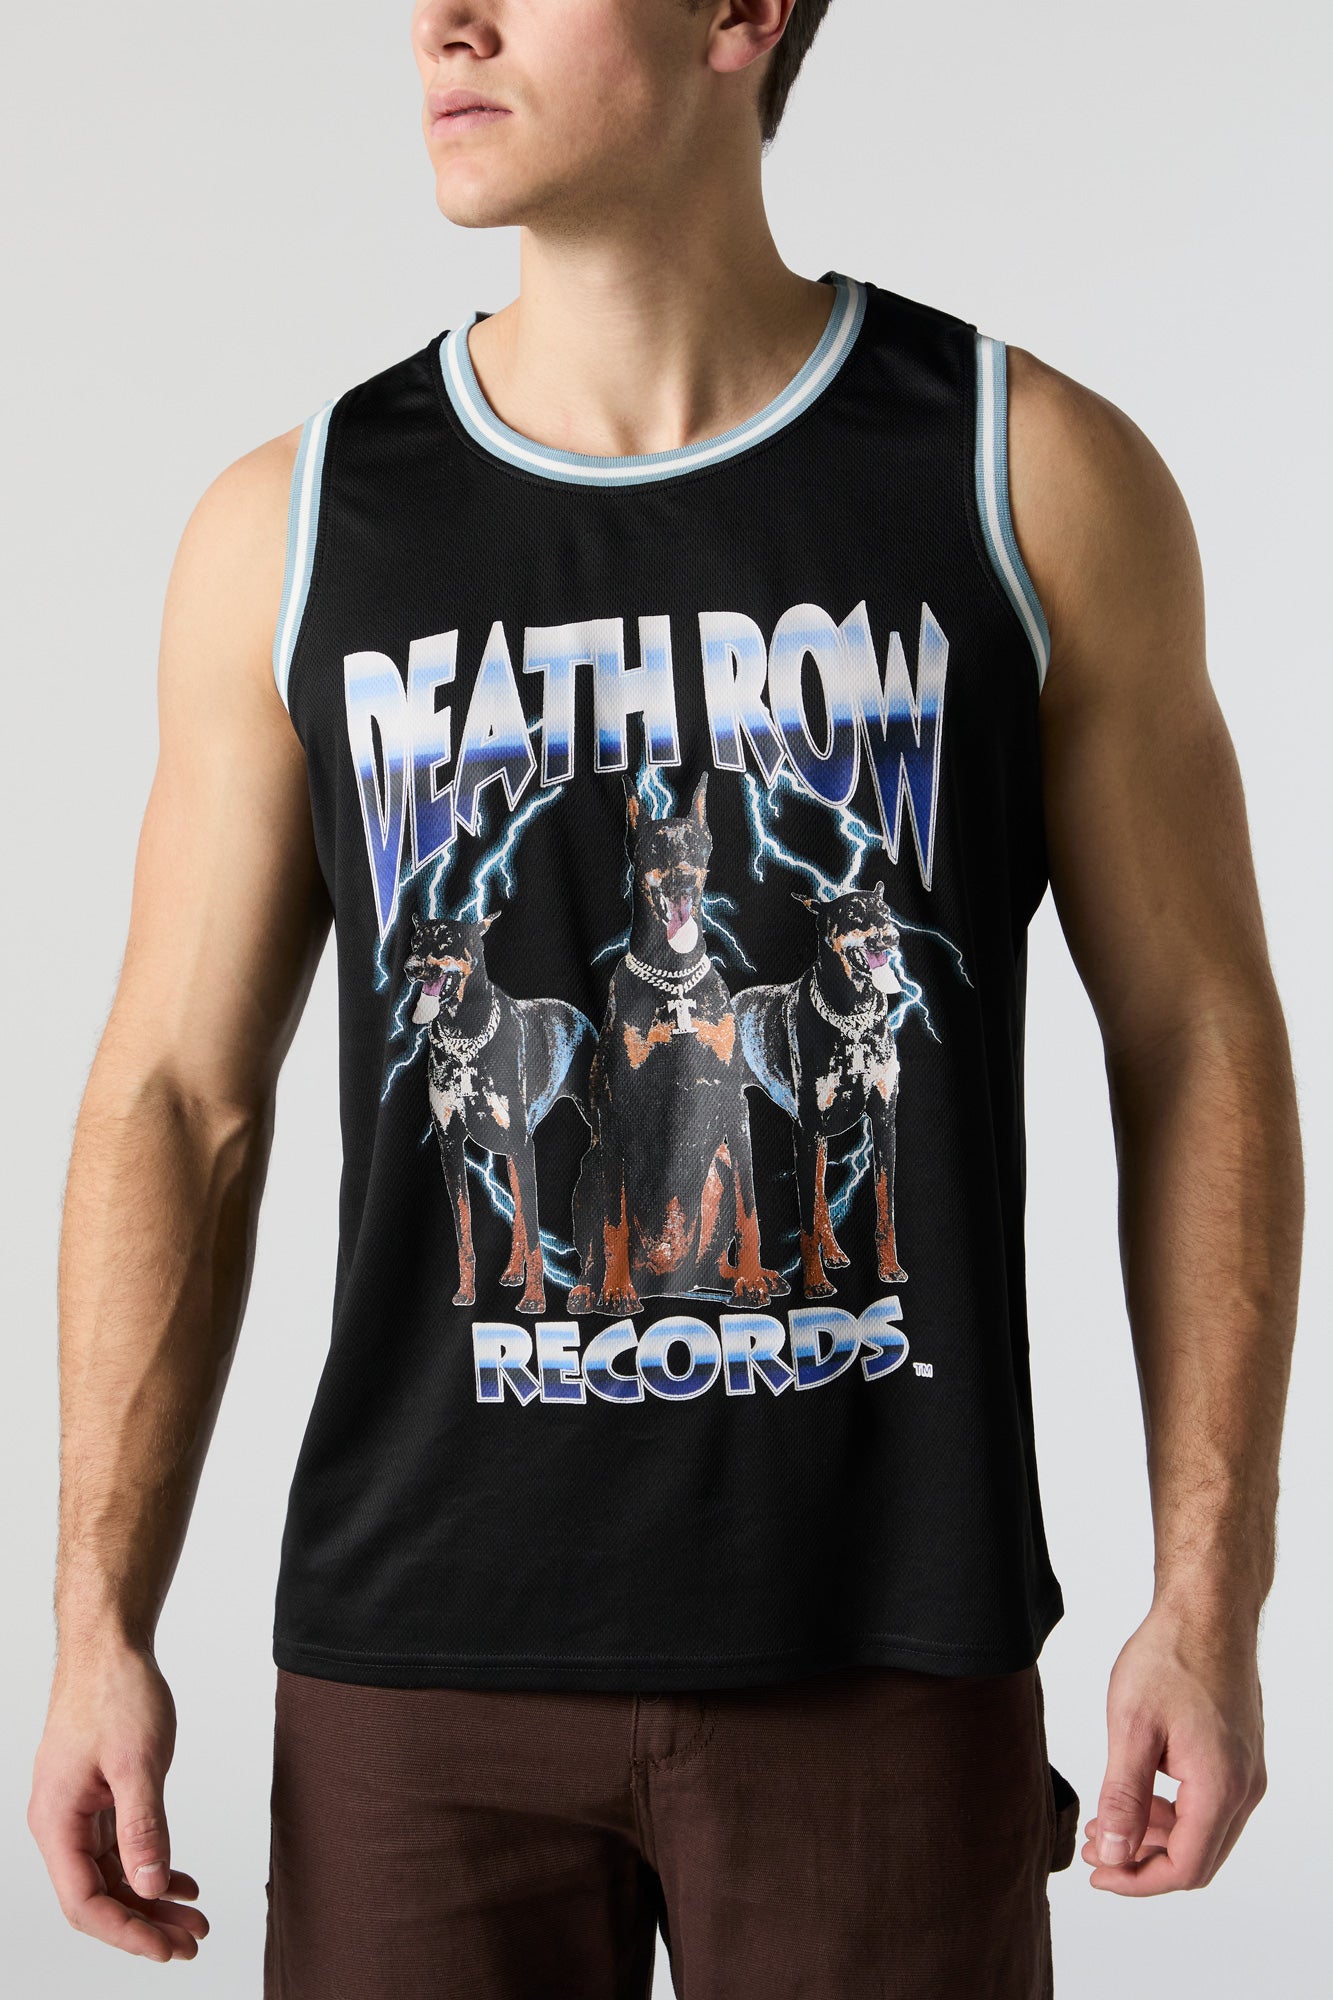 Death Row Records Graphic Basketball Jersey